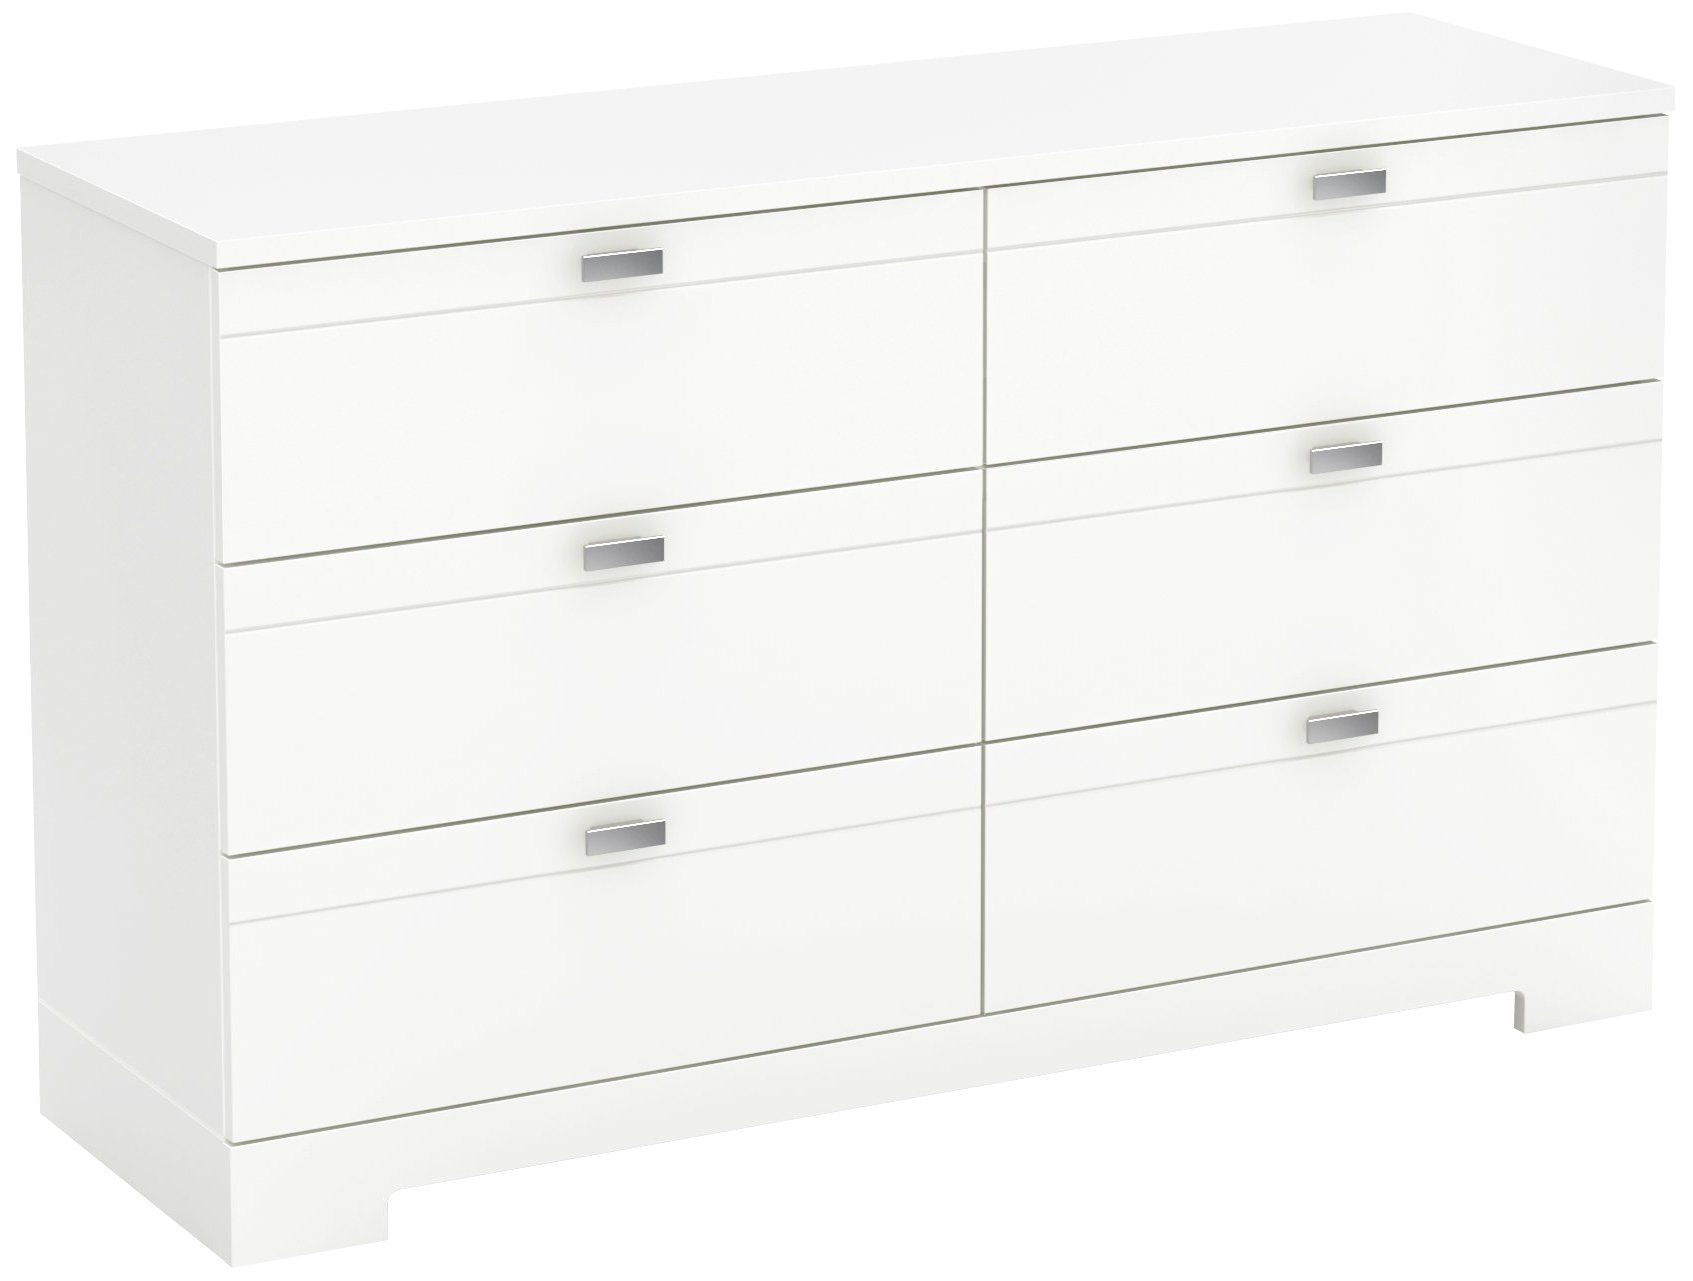 South Shore Reevo 6-Drawer Double Dresser, Pure White with Matte Nickel Handles